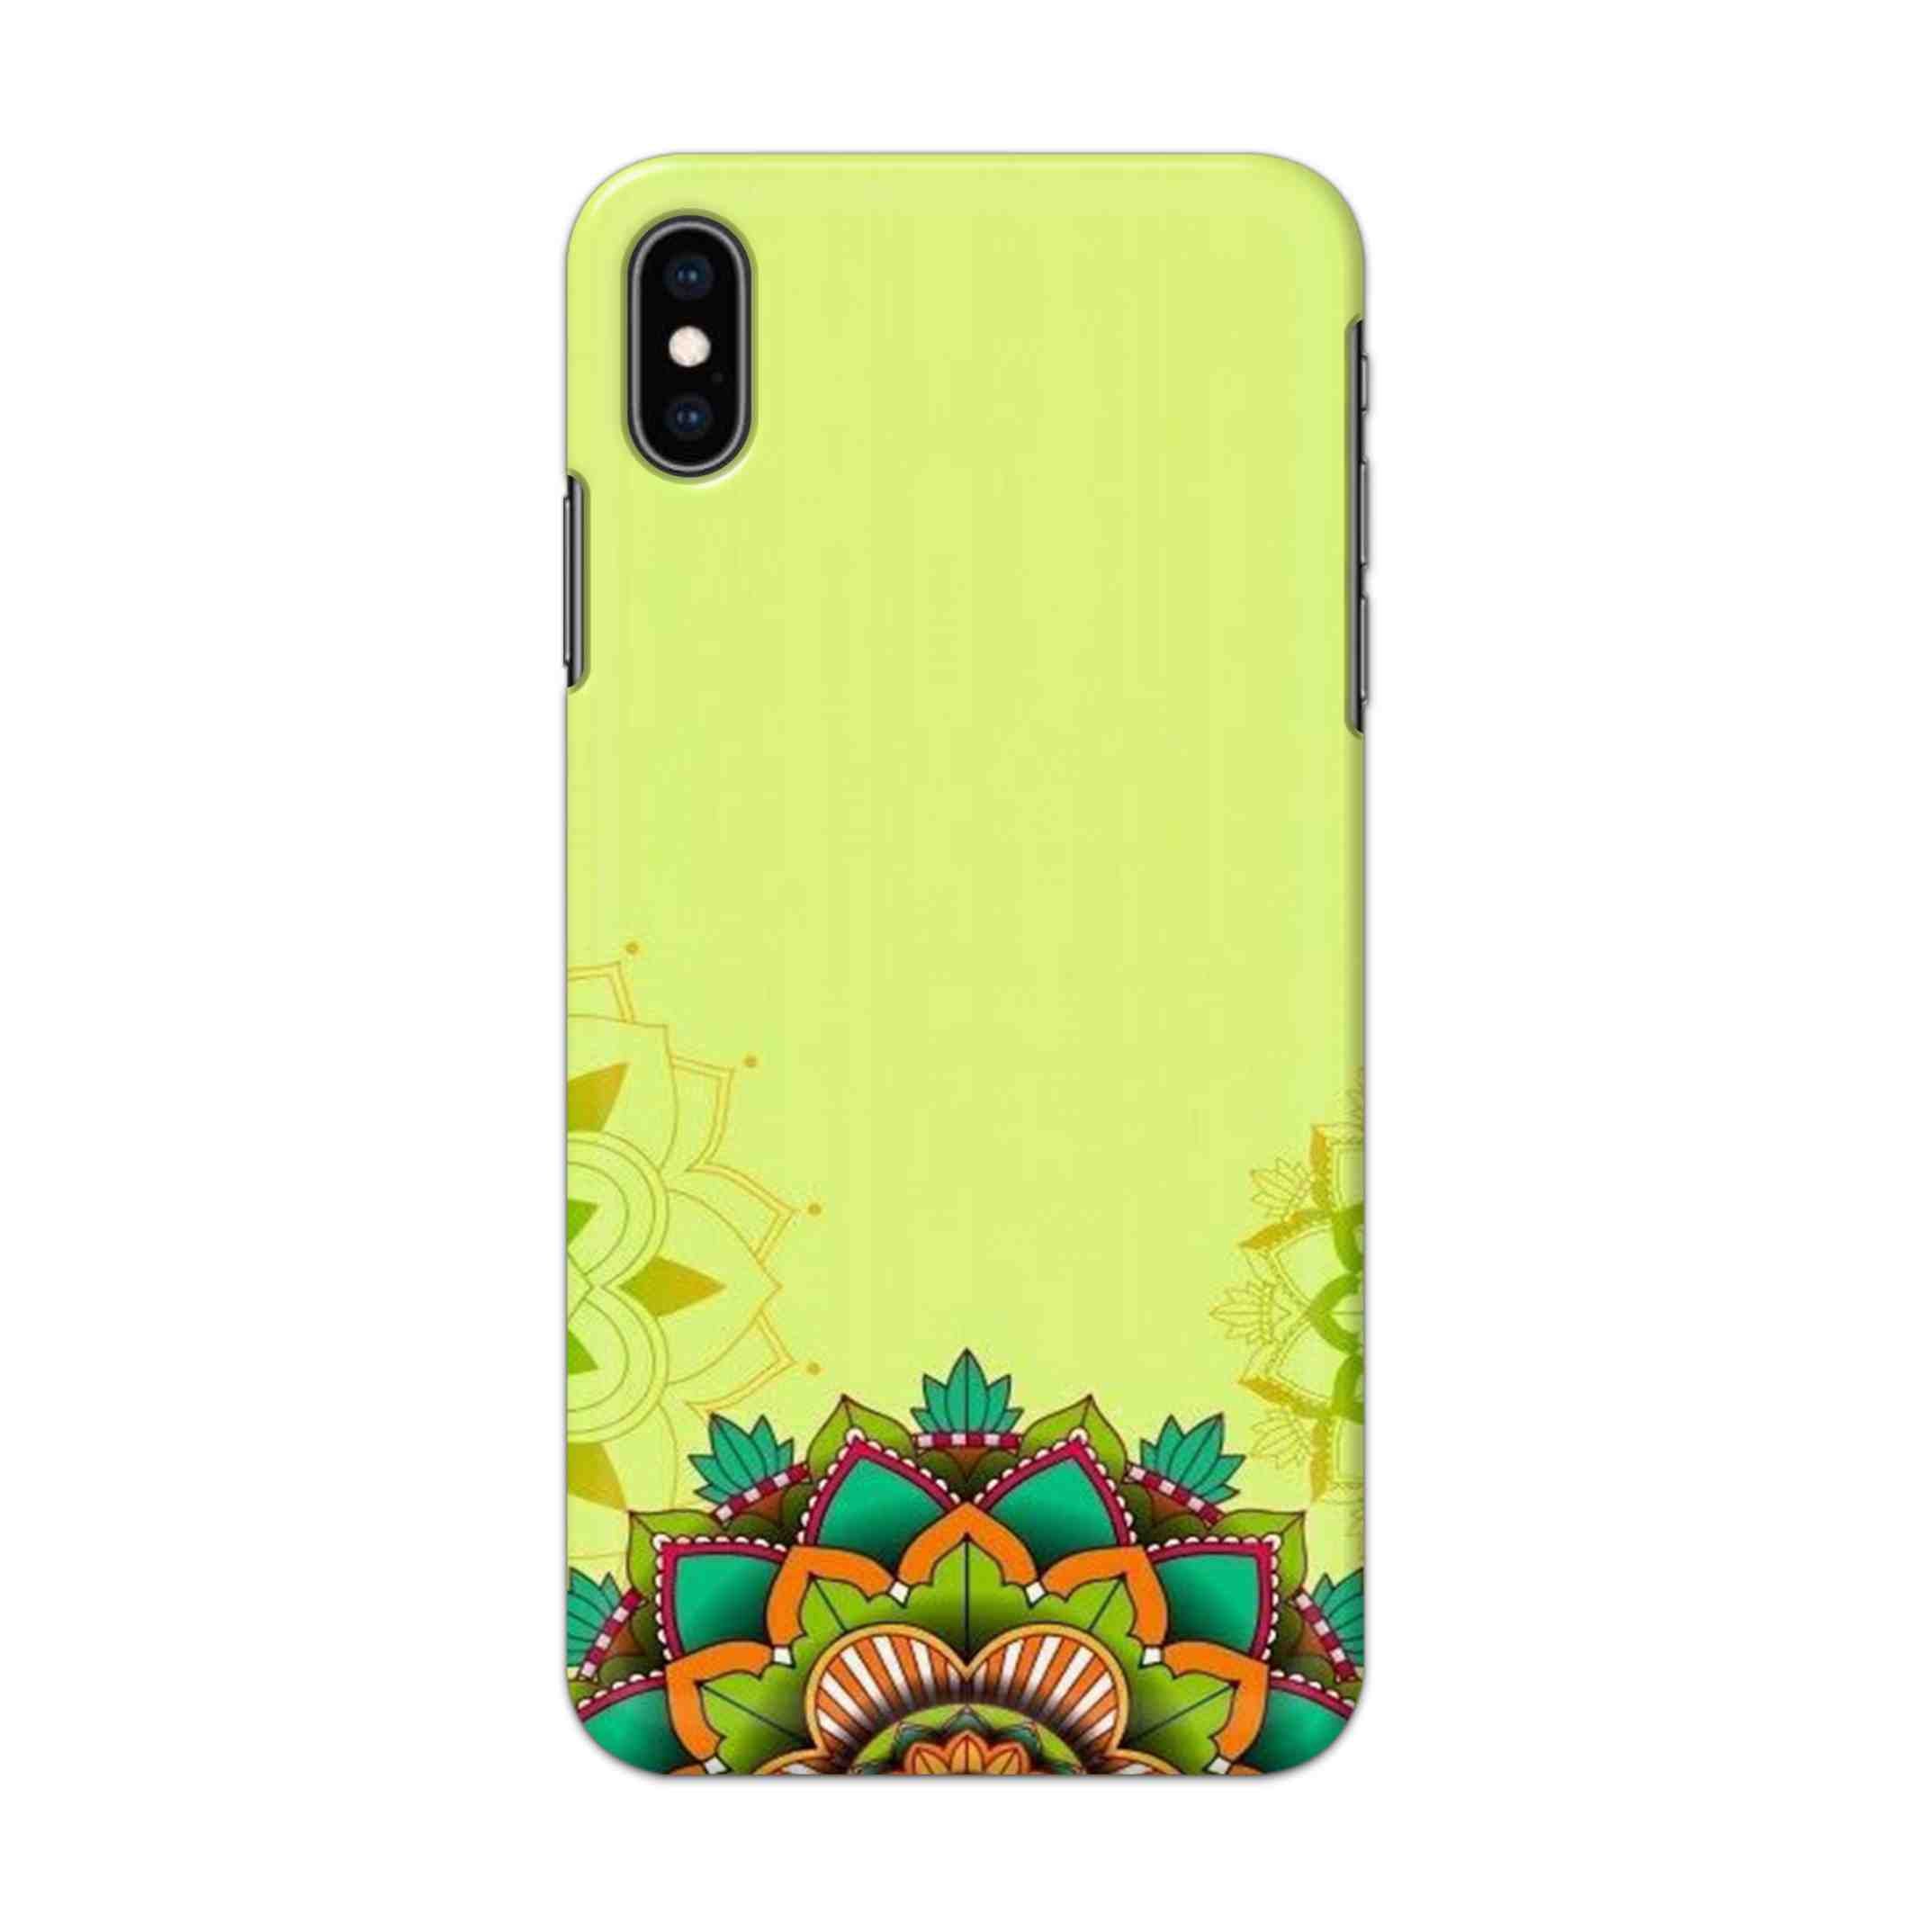 Buy Flower Mandala Hard Back Mobile Phone Case/Cover For iPhone XS MAX Online